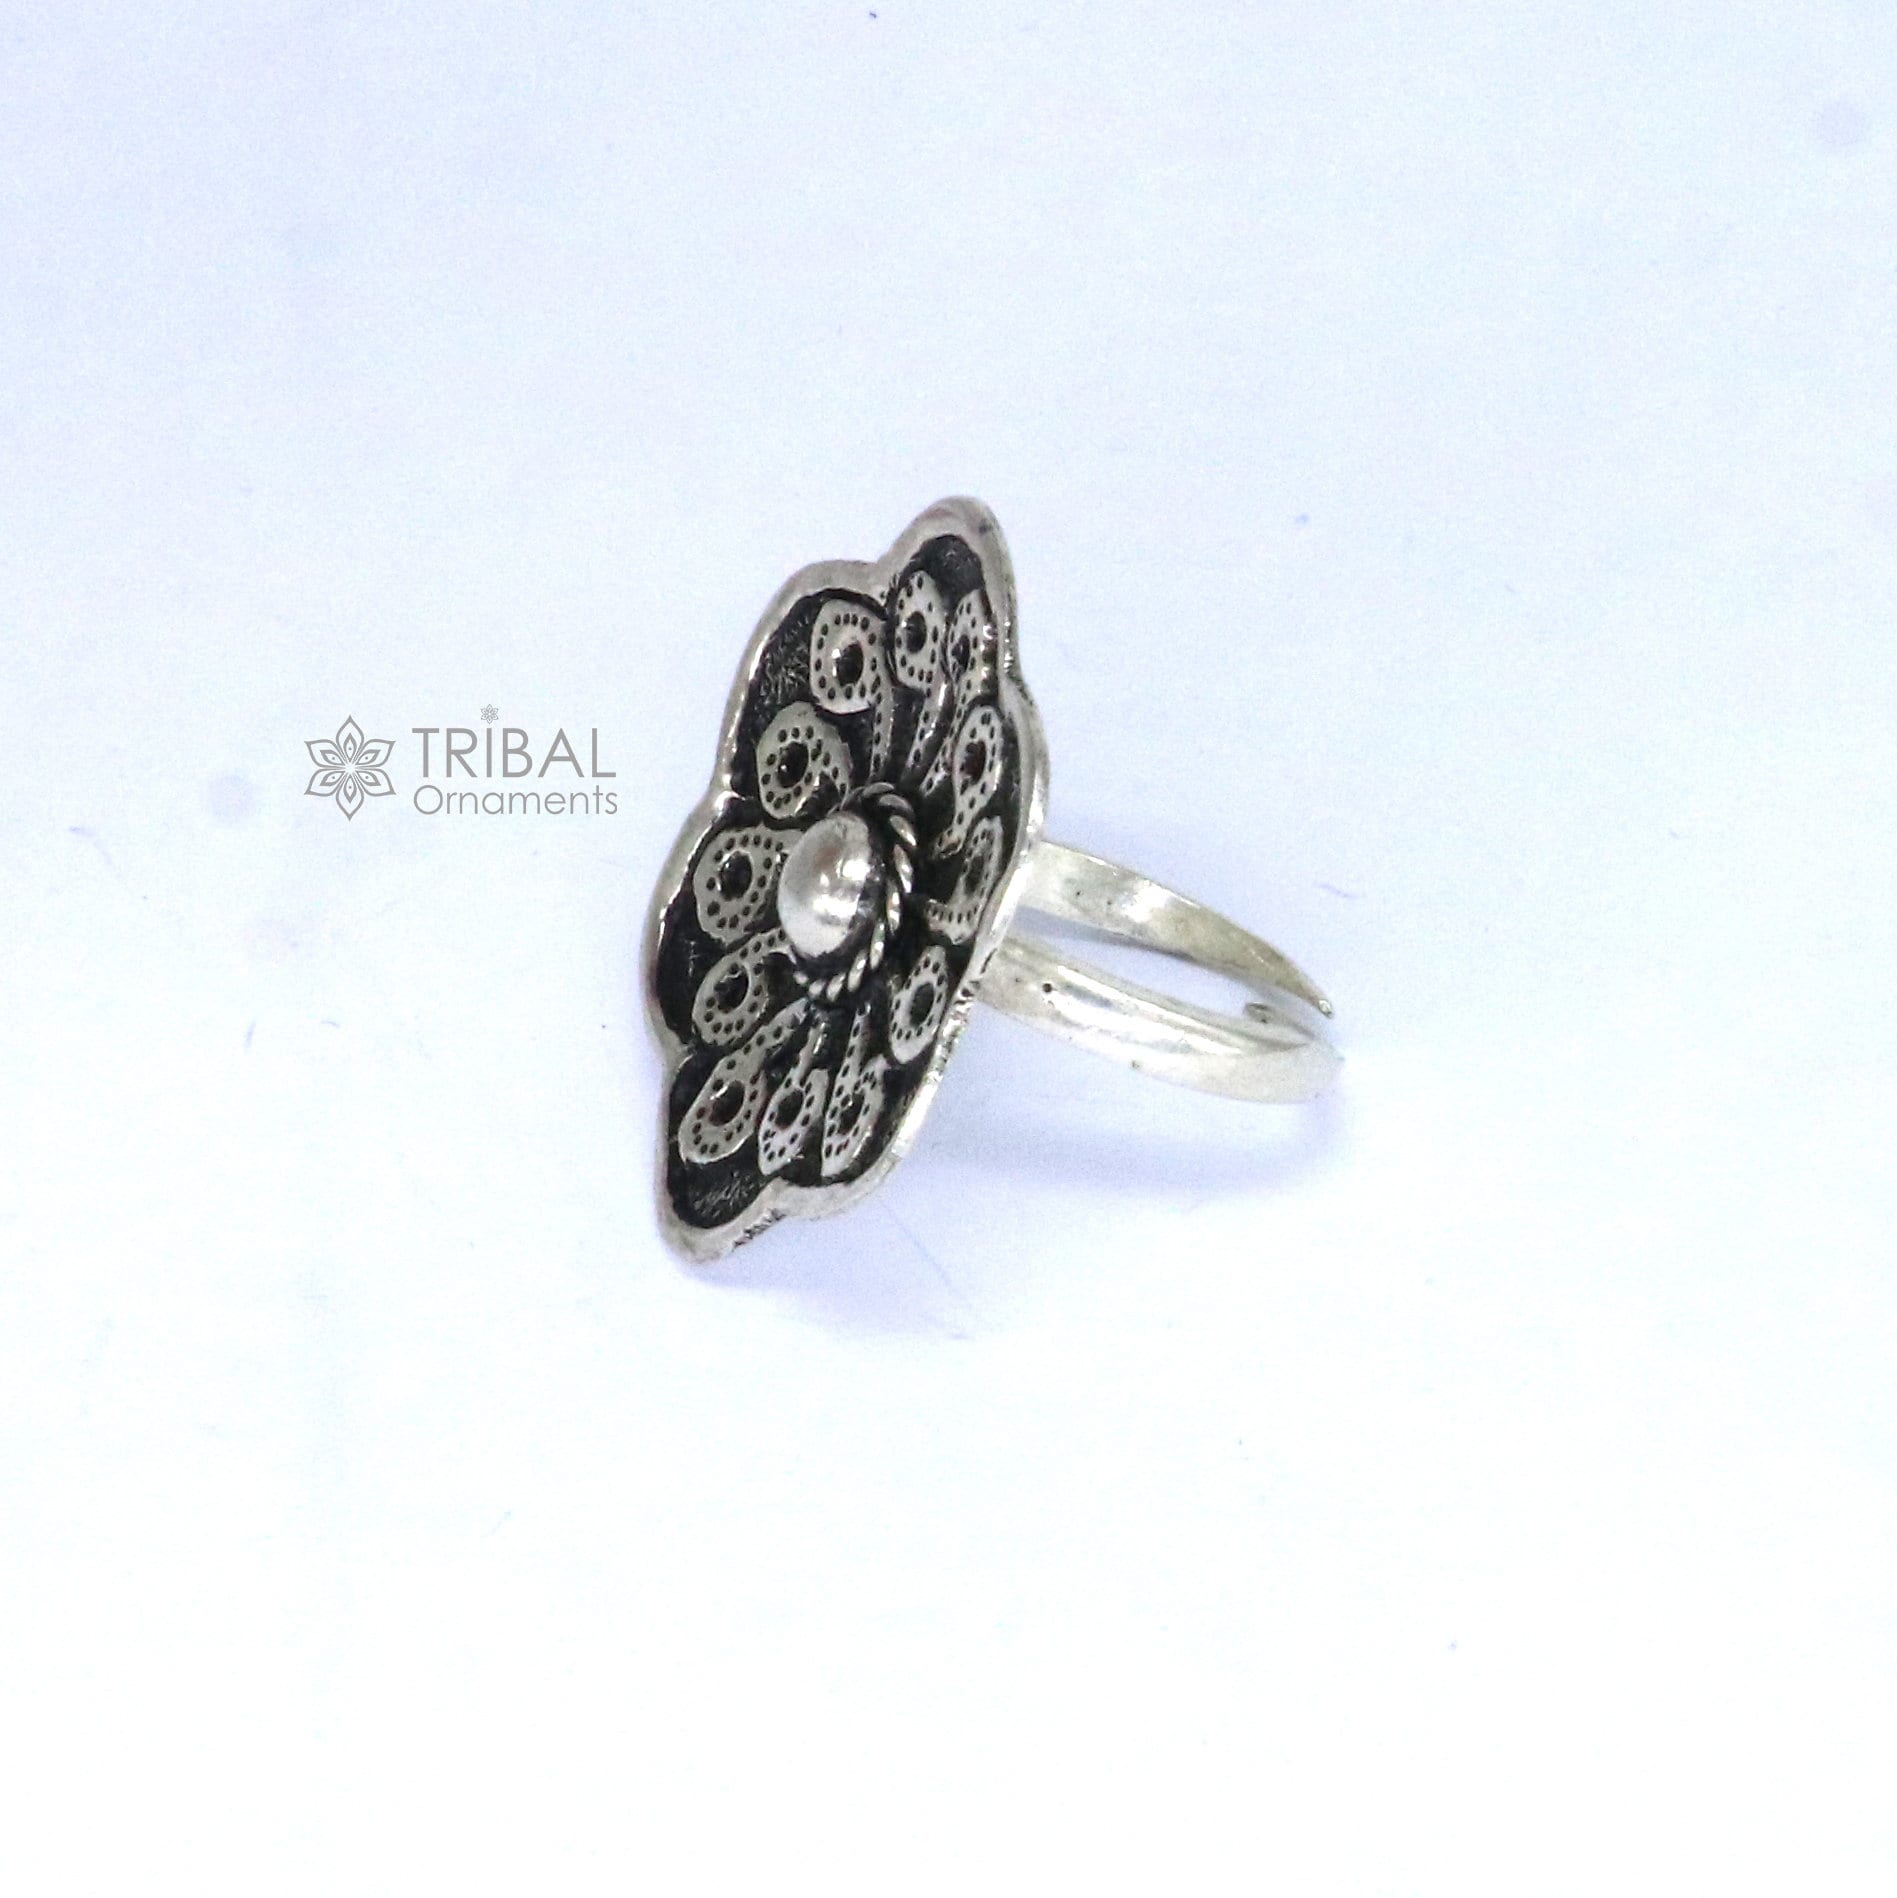 Traditional cultural flower design 925 sterling silver adjustable ring, best tribal ethnic jewelry for belly dance Navratri jewelry sr386 - TRIBAL ORNAMENTS